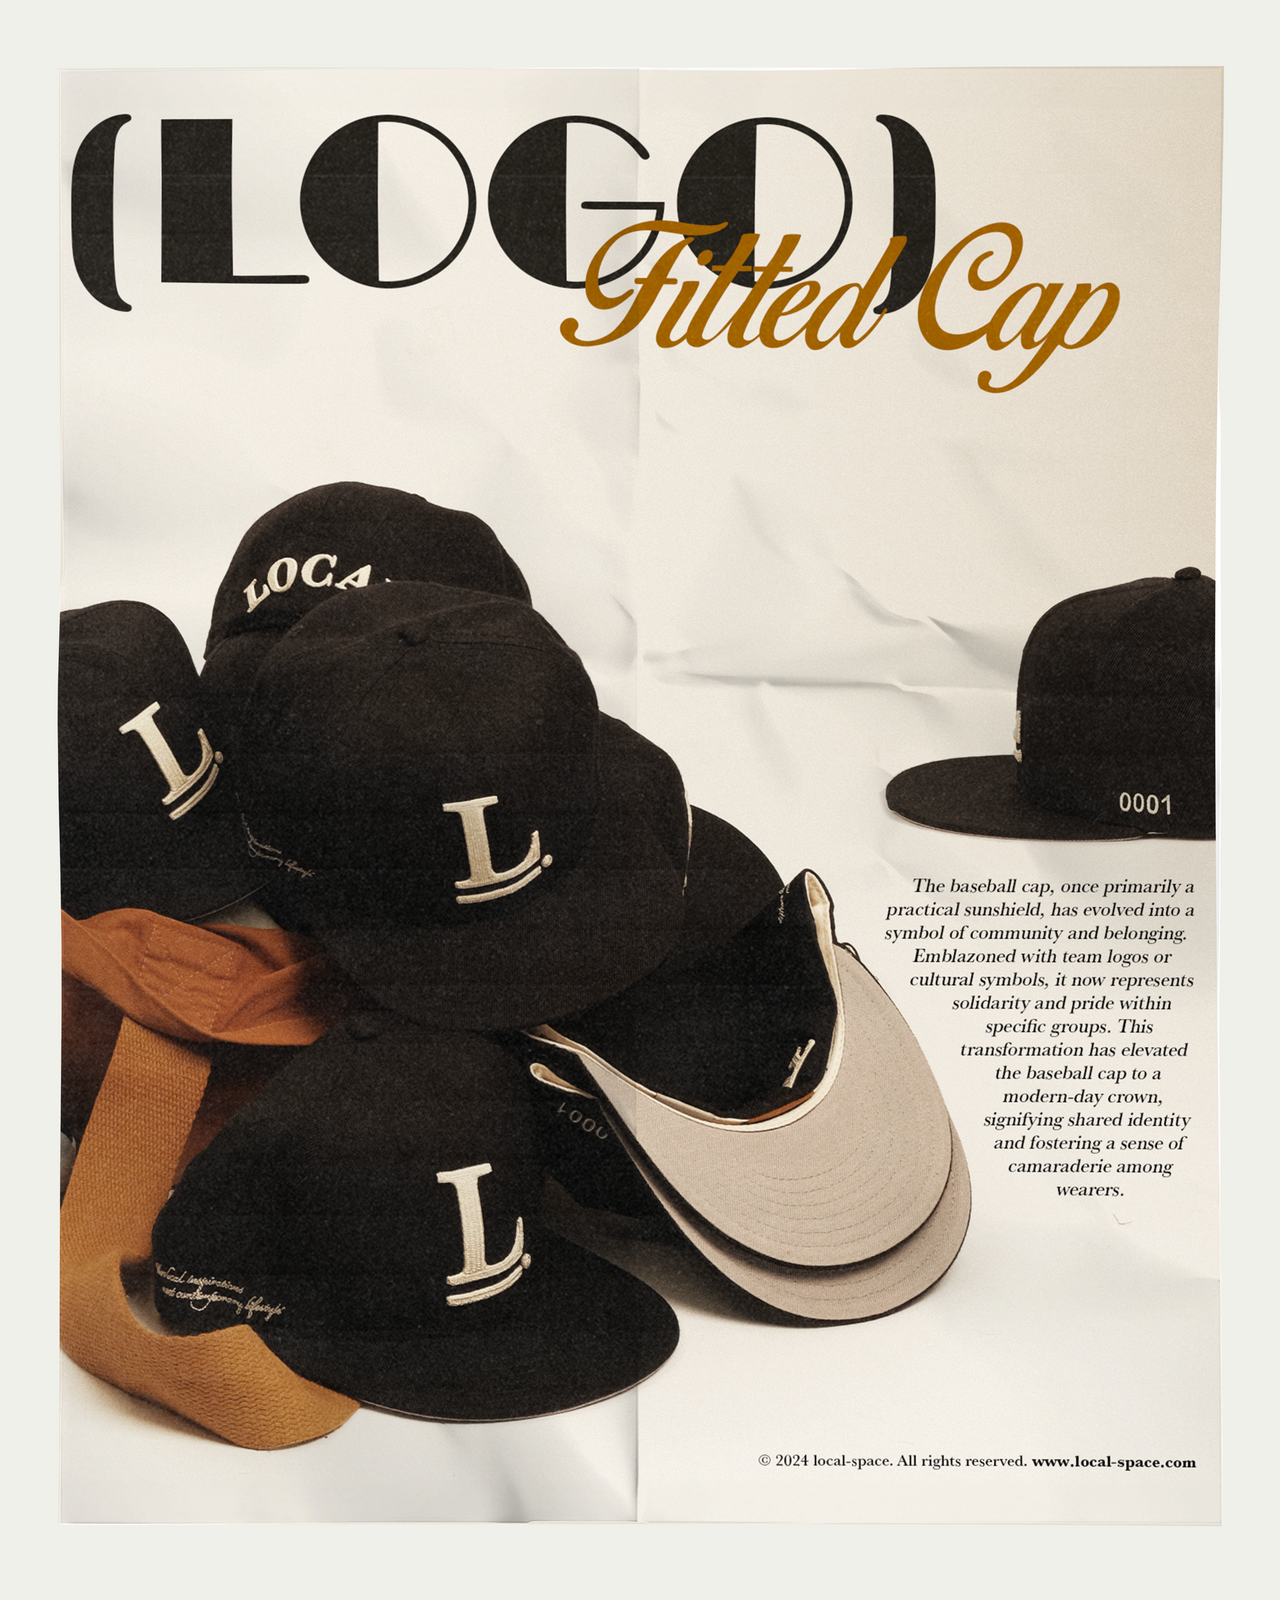 Black fitted baseball cap with Local Space emblem in 3D chain embroidery on the front, 'ISSUE 0001' on the left, and LOCAL logo on the rear, structured crown and flat brim with a grey underside.